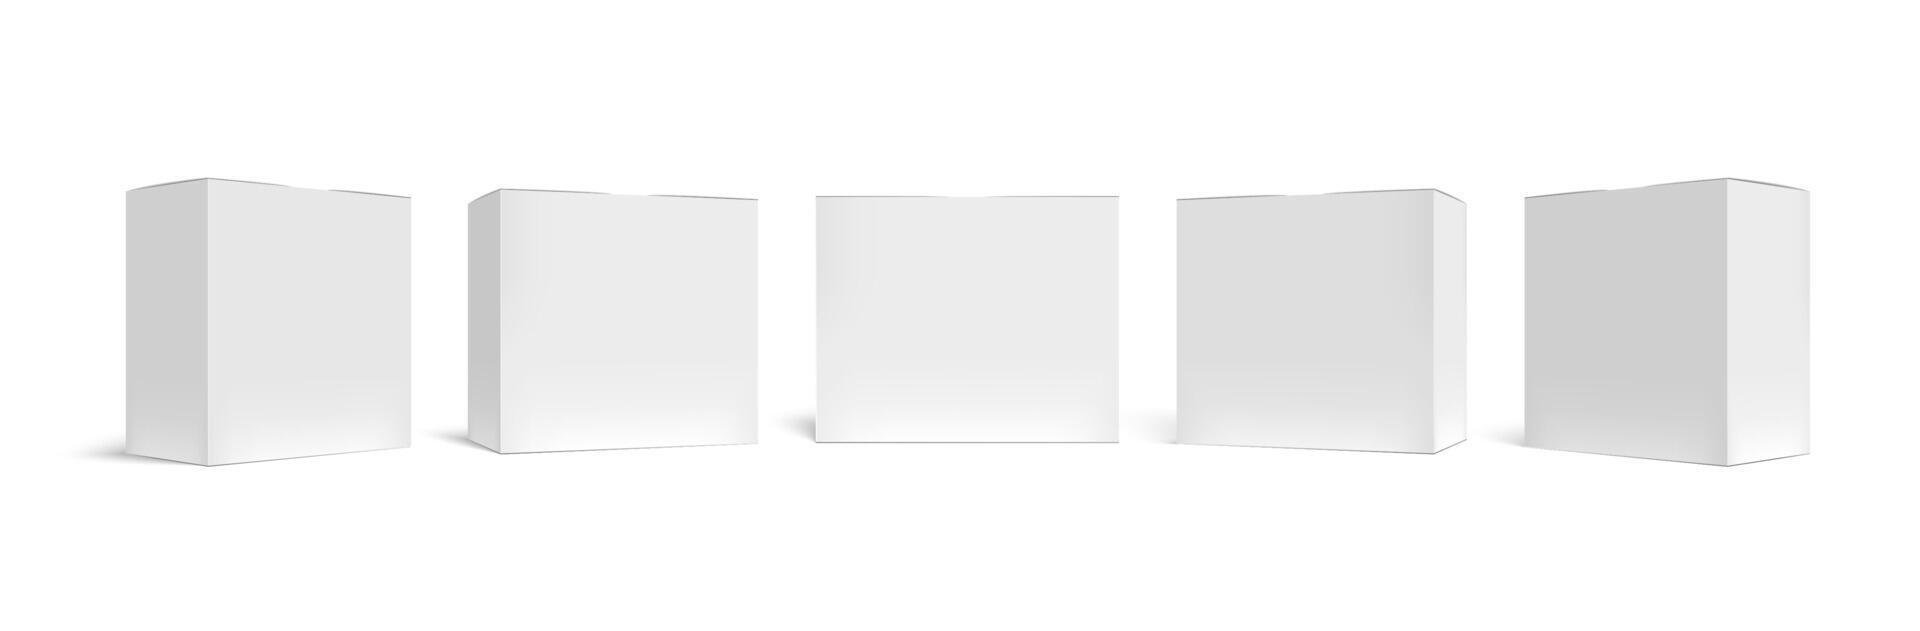 Realistic packaging box. White cardboard boxes mockup, medical case and horizontal rectangular pack 3D vector template set. Closed square packages. Blank carton containers isolated on white backdrop